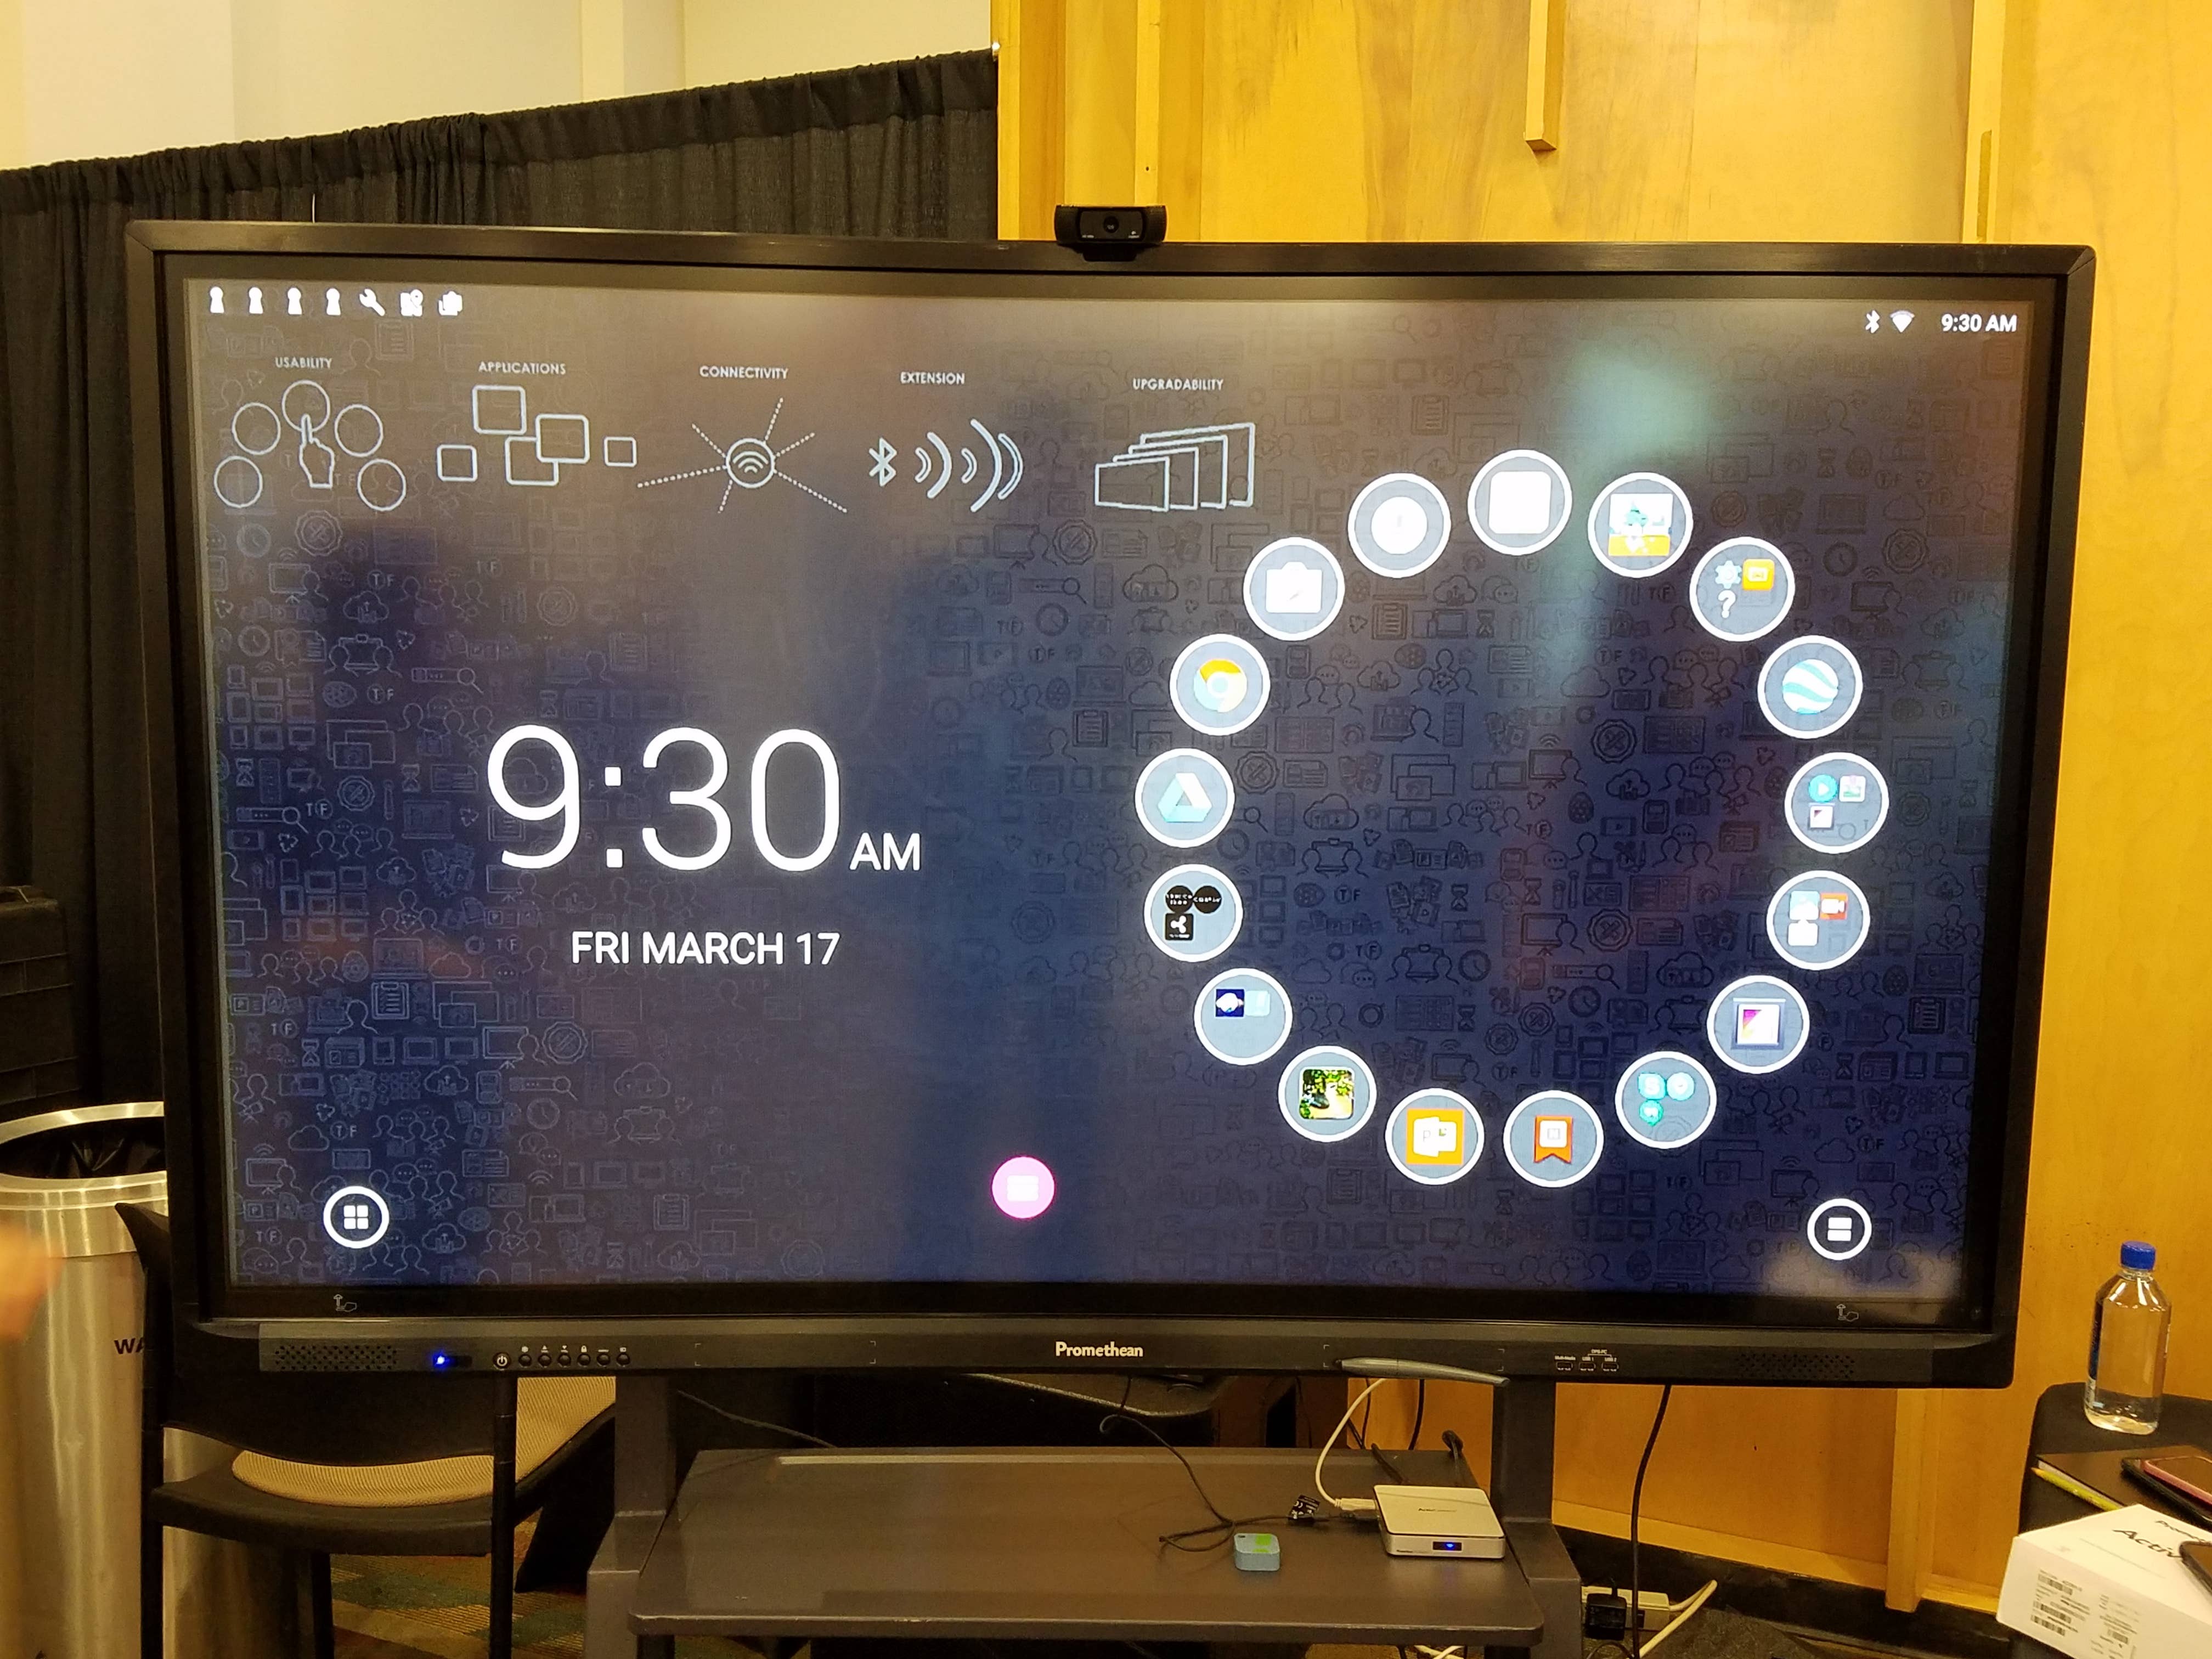 An image of a Promethean board taken at an ed tech conference